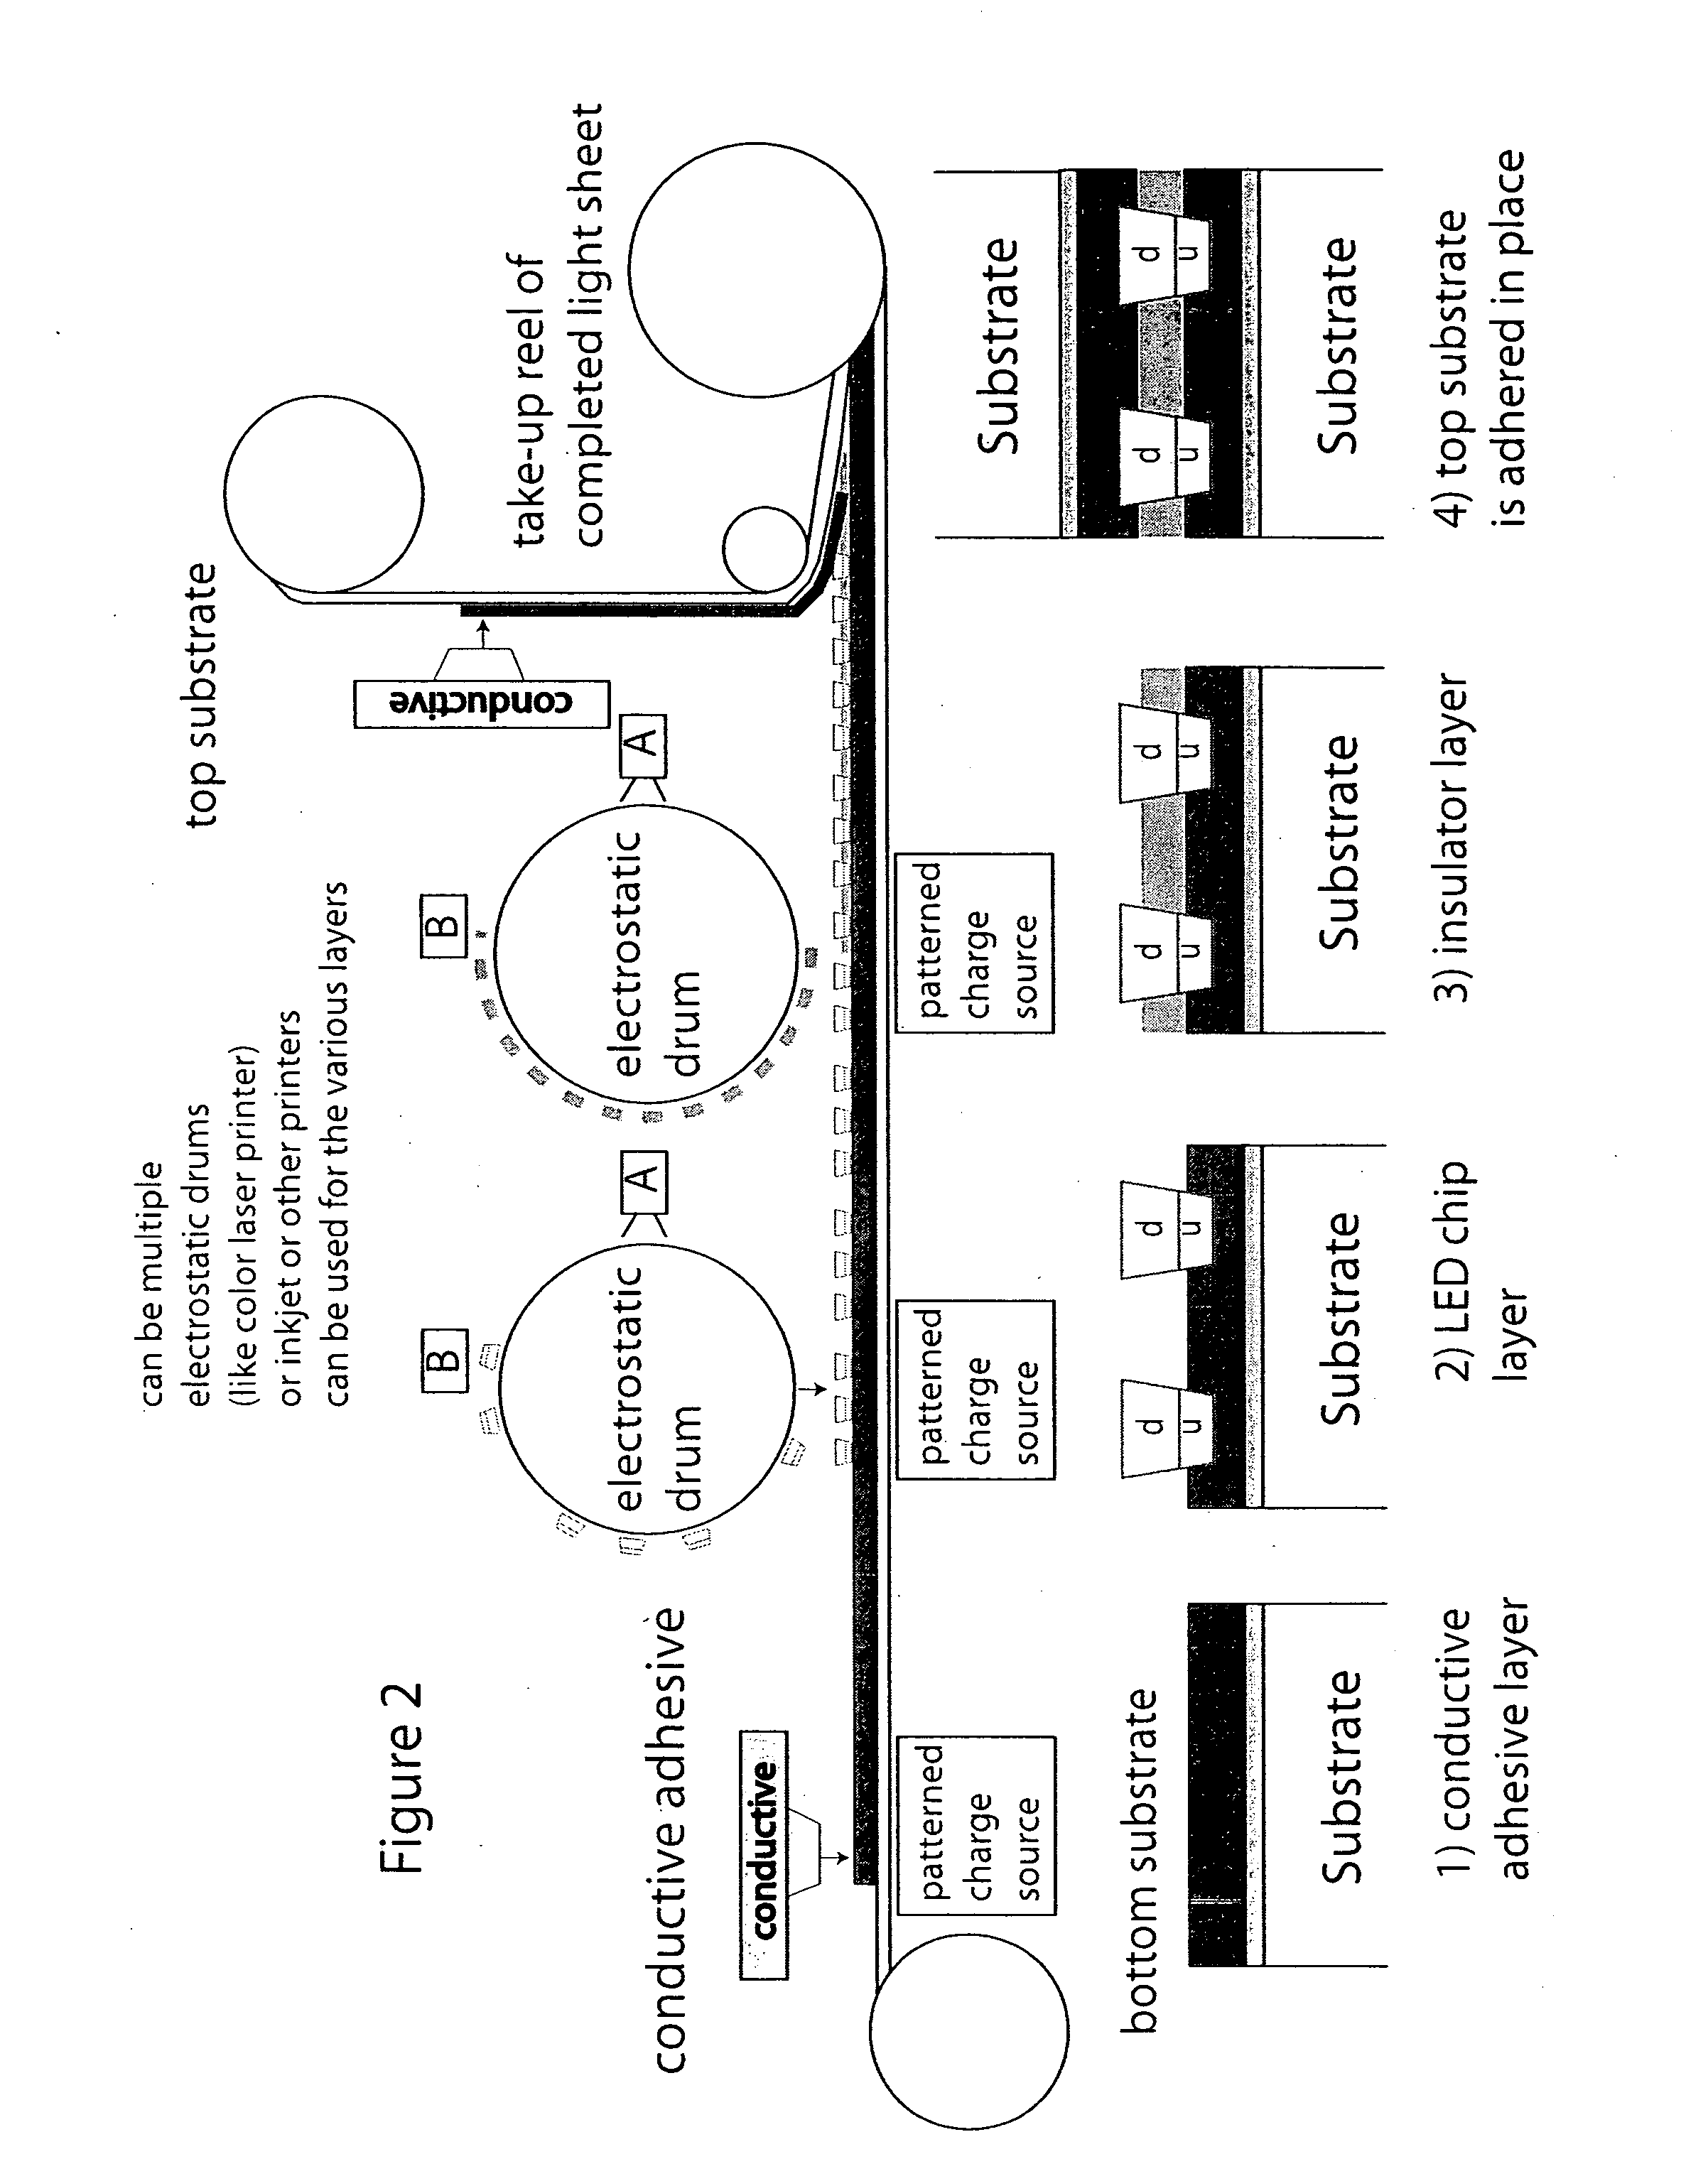 Roll-to-roll fabricated electronically active device